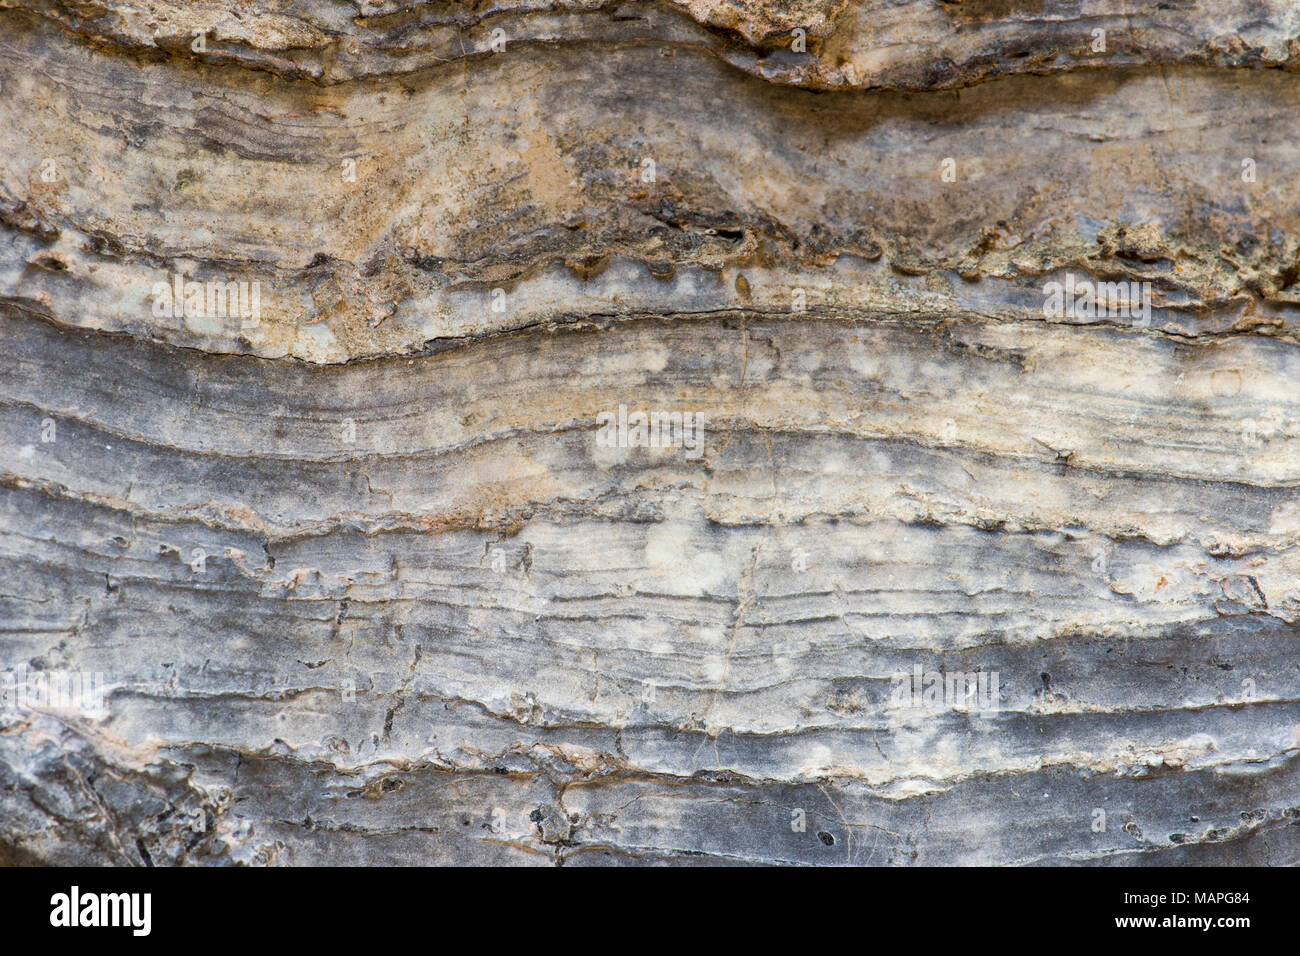 Close up of stromatolite layering (fossilized microbes from the late Precambrian or early Cambrian periods) Stock Photo